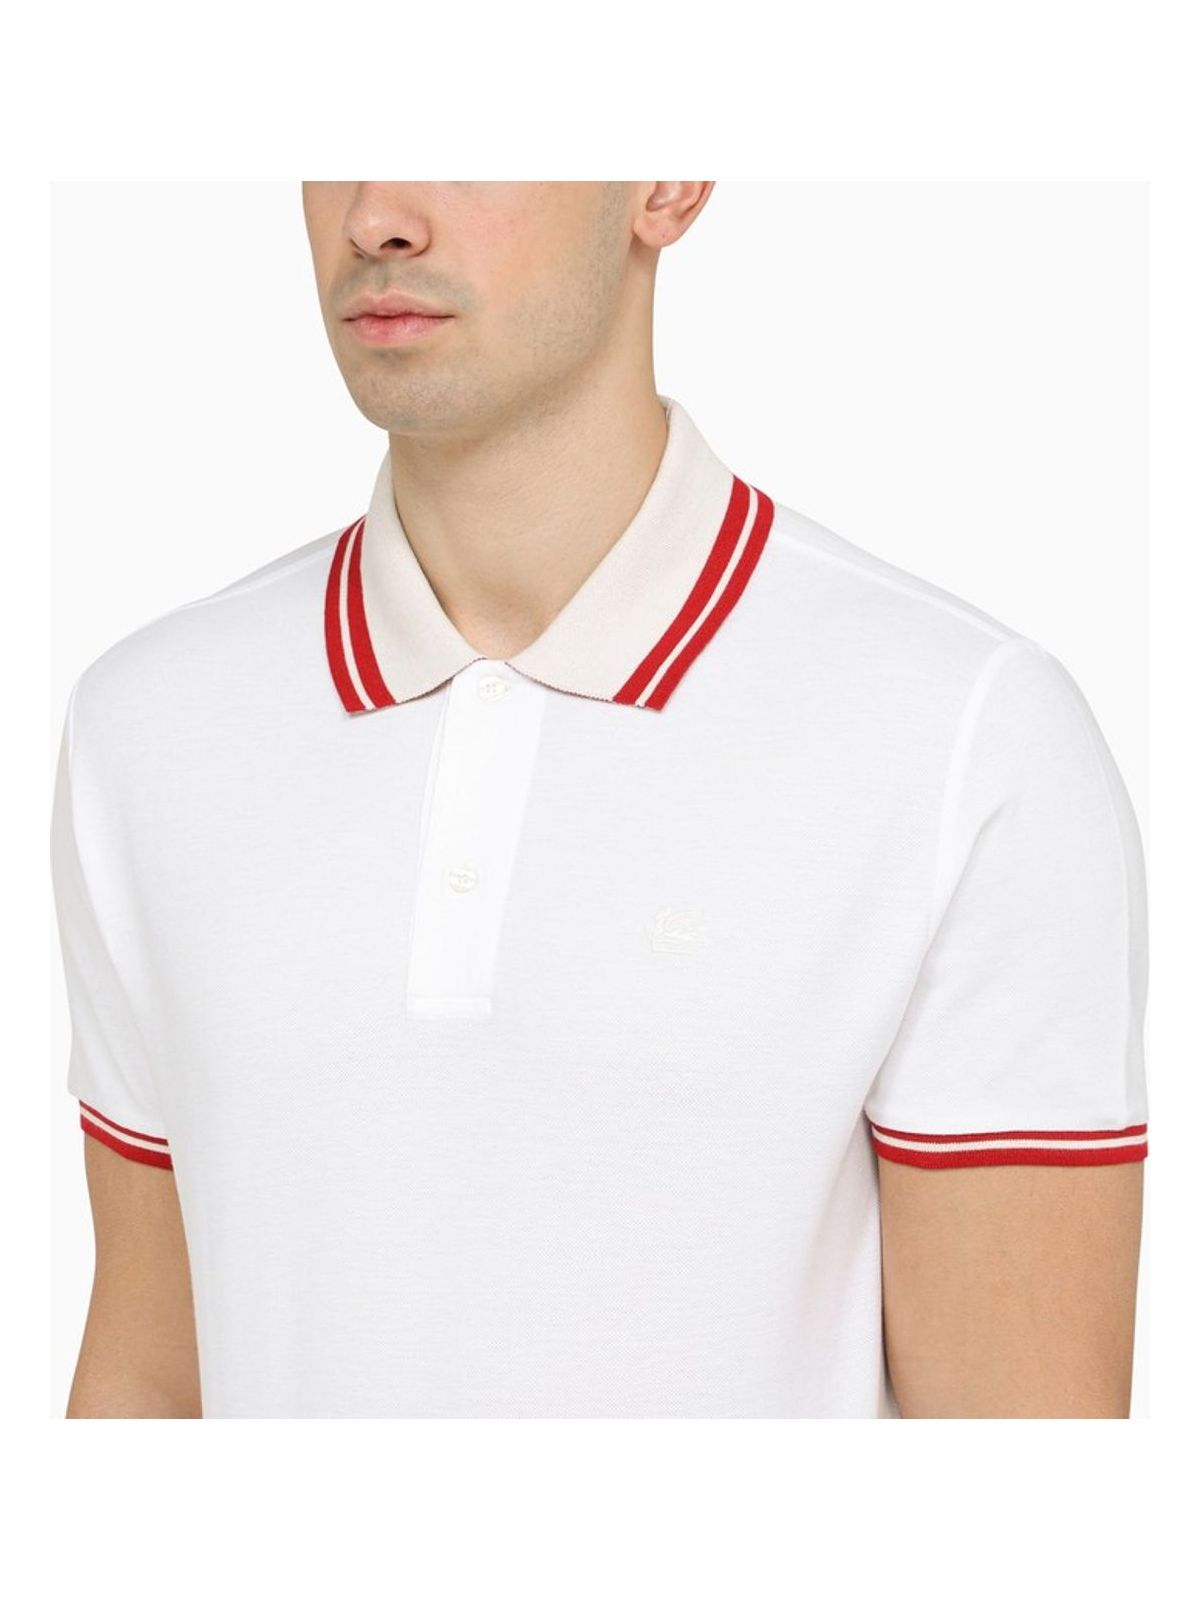 W0800 ETRO  WHITE SHORT-SLEEVED POLO SHIRT WITH LOGO EMBROIDERY